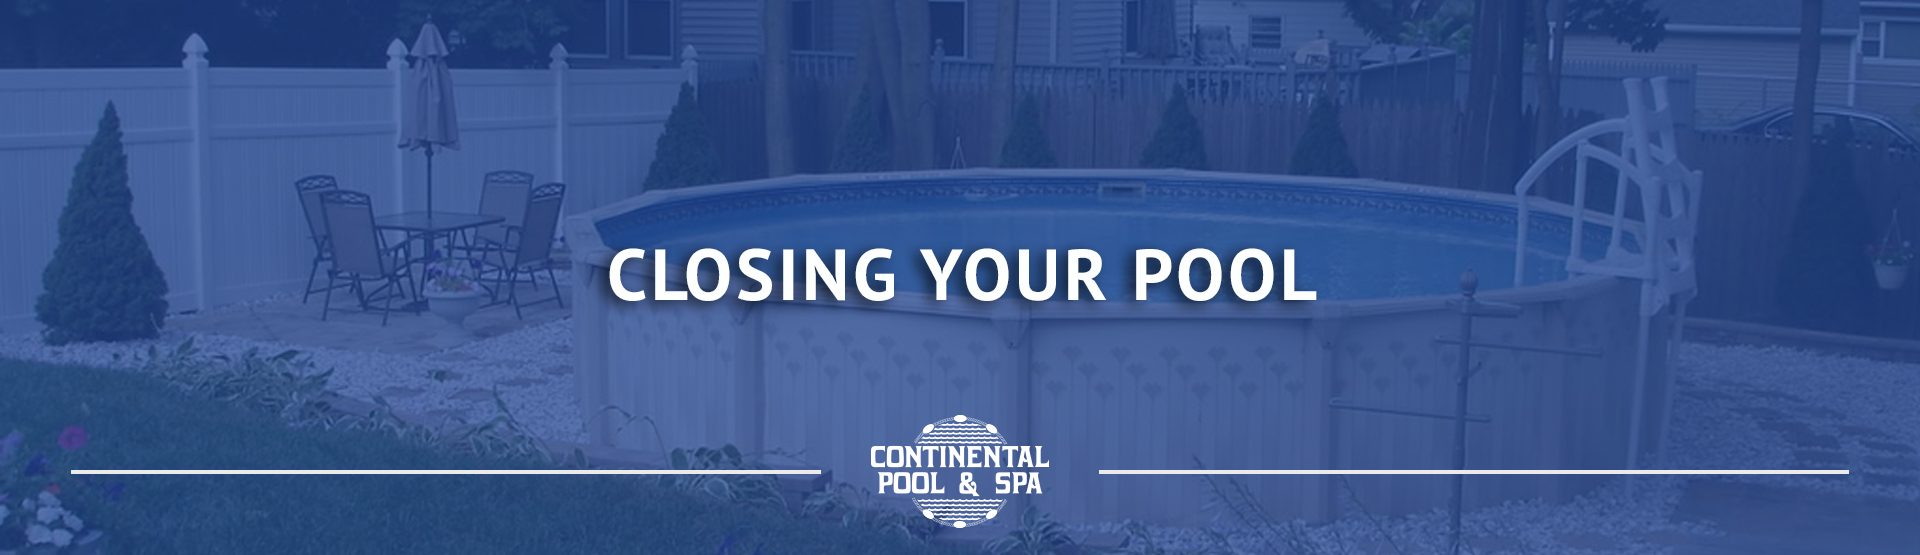 The End Of Summer: Closing Your Pool